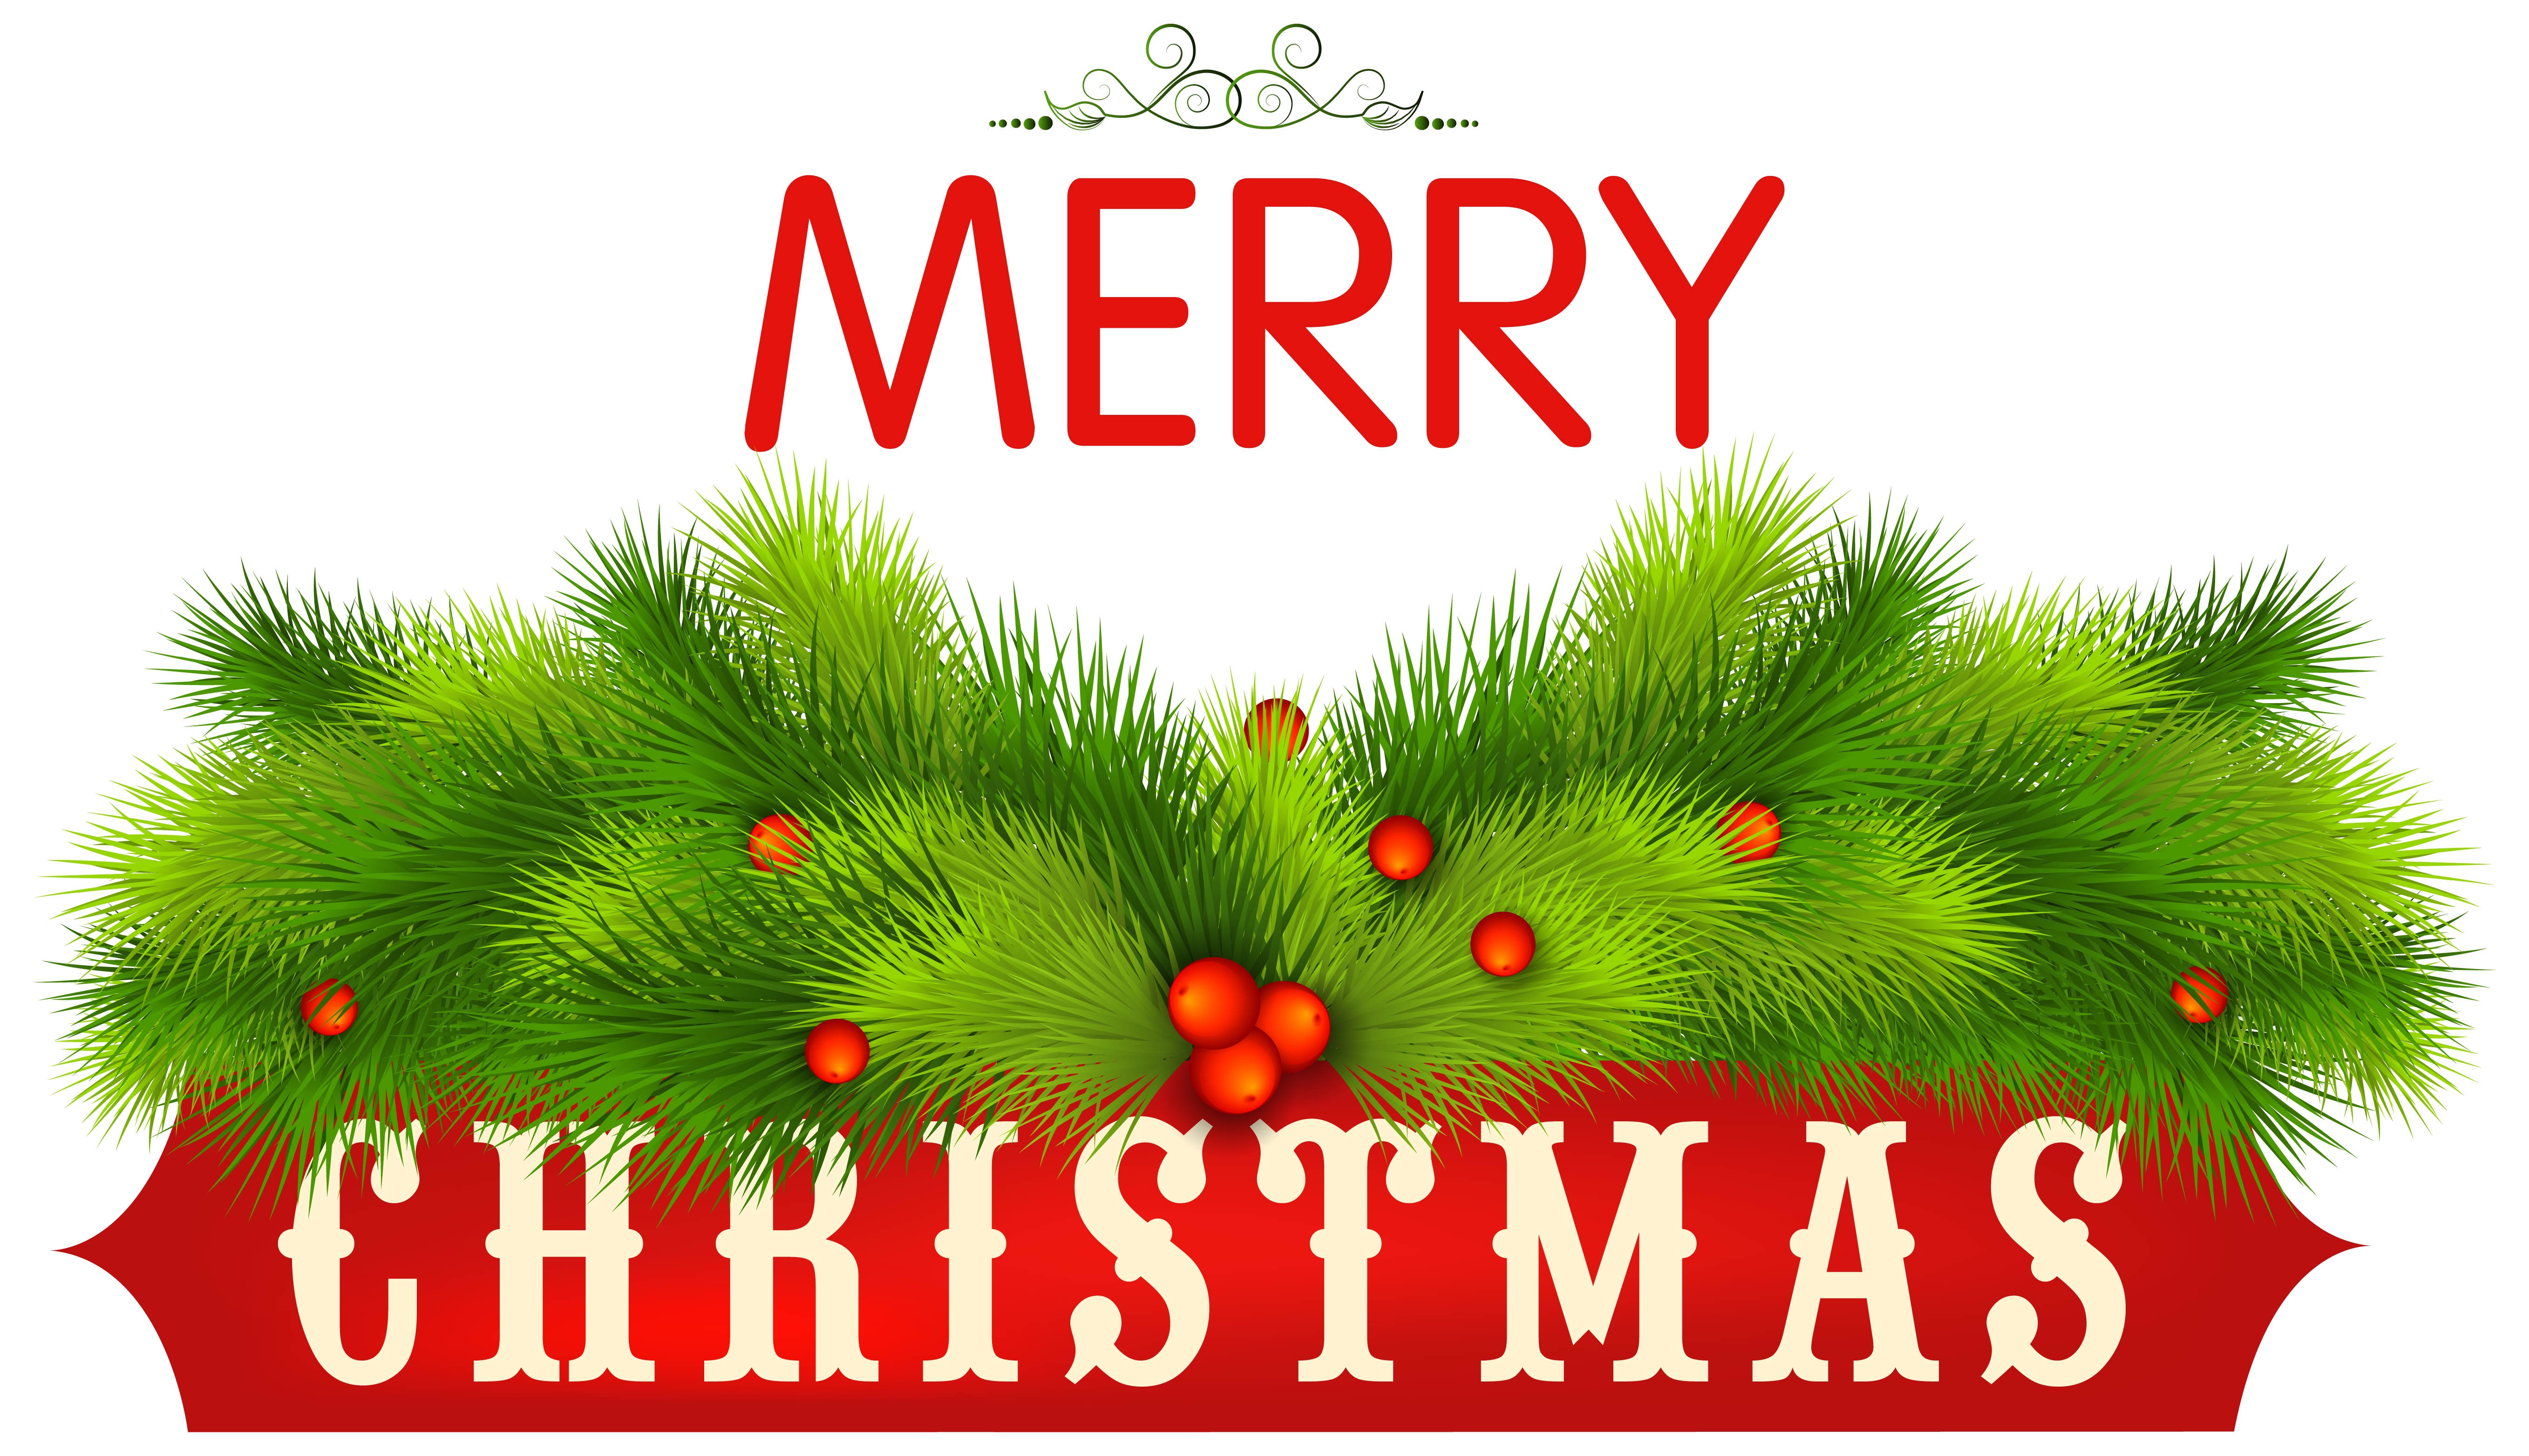 Decoration clipart merry christmas. Decorative png image gallery